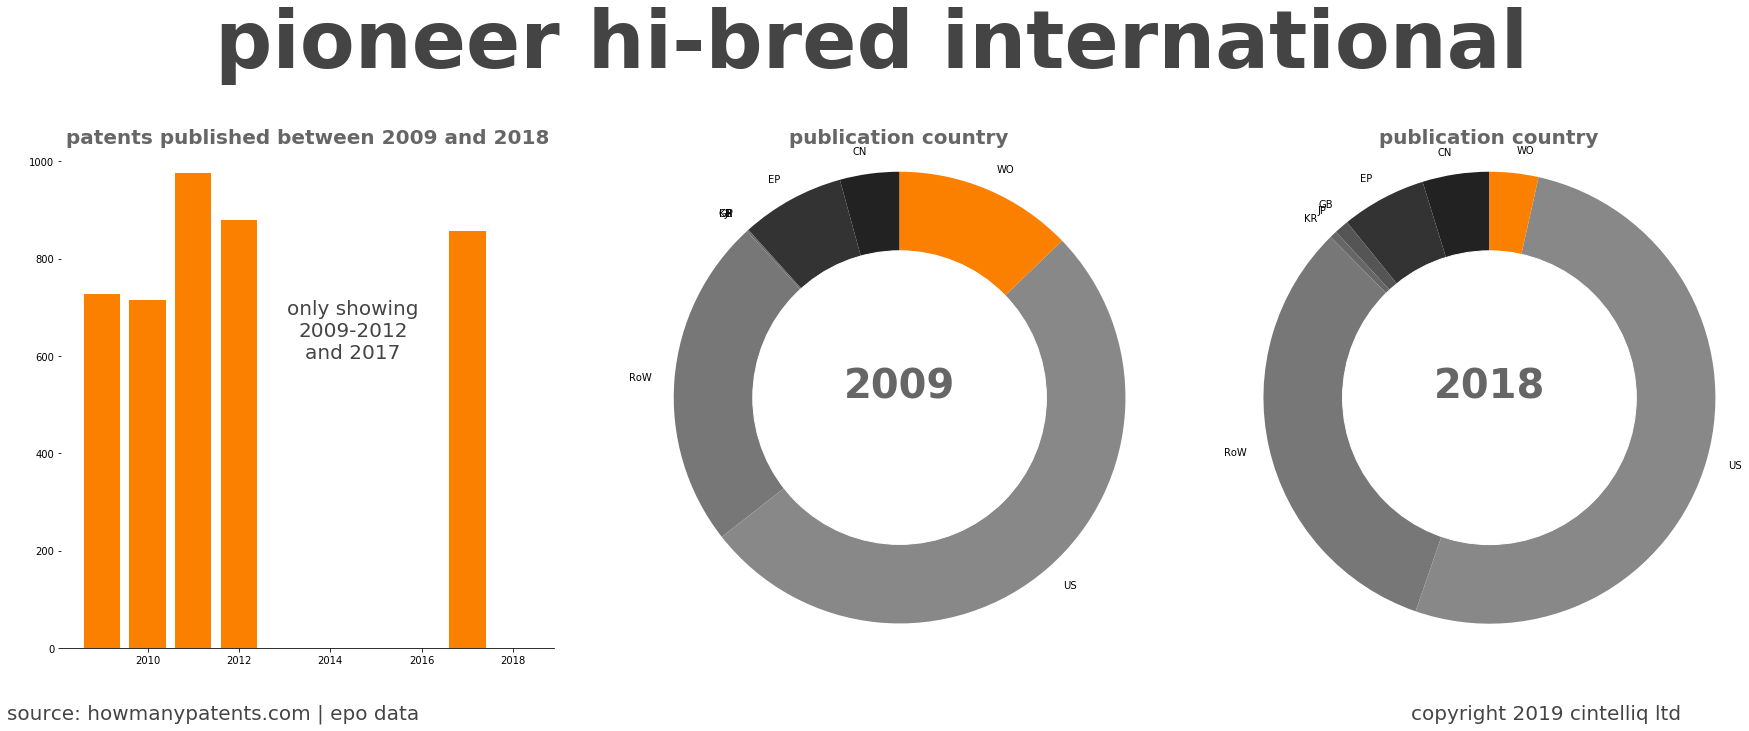 summary of patents for Pioneer Hi-Bred International